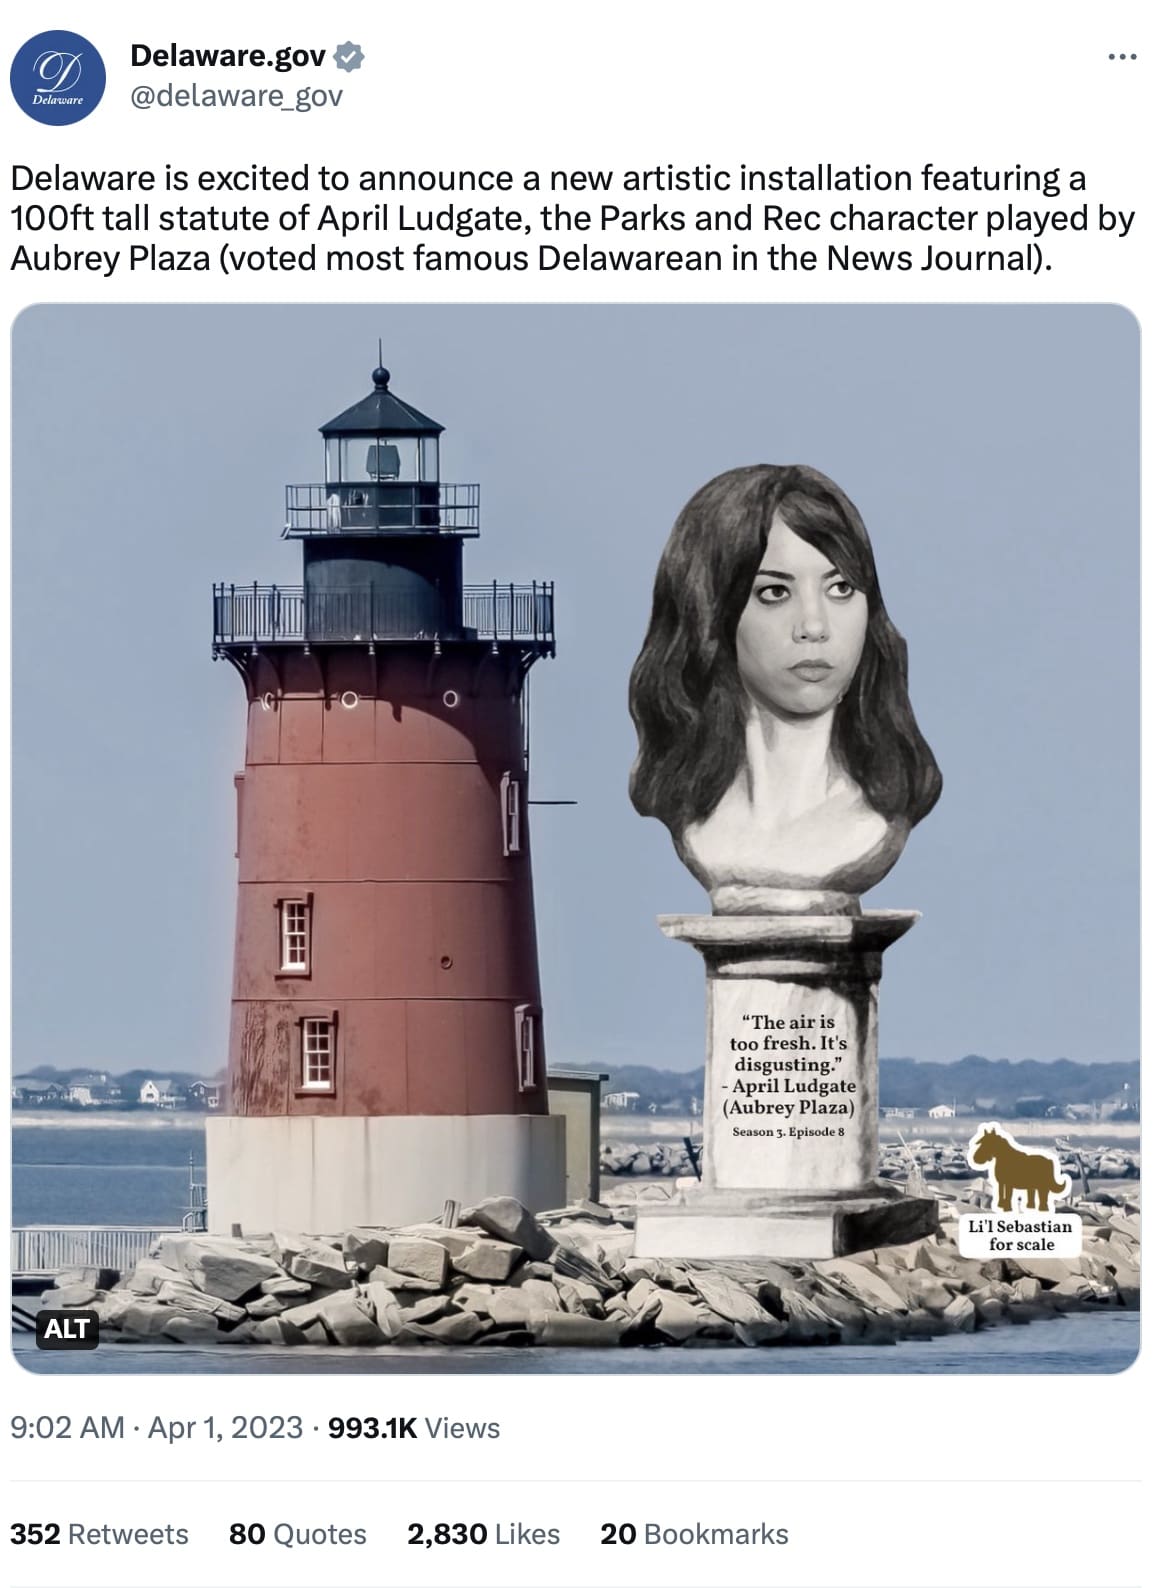 Delaware is planning a statue of April Ludgate (the Aubrey Plaza character on "Parks and Rec") in Cape Henlopen.